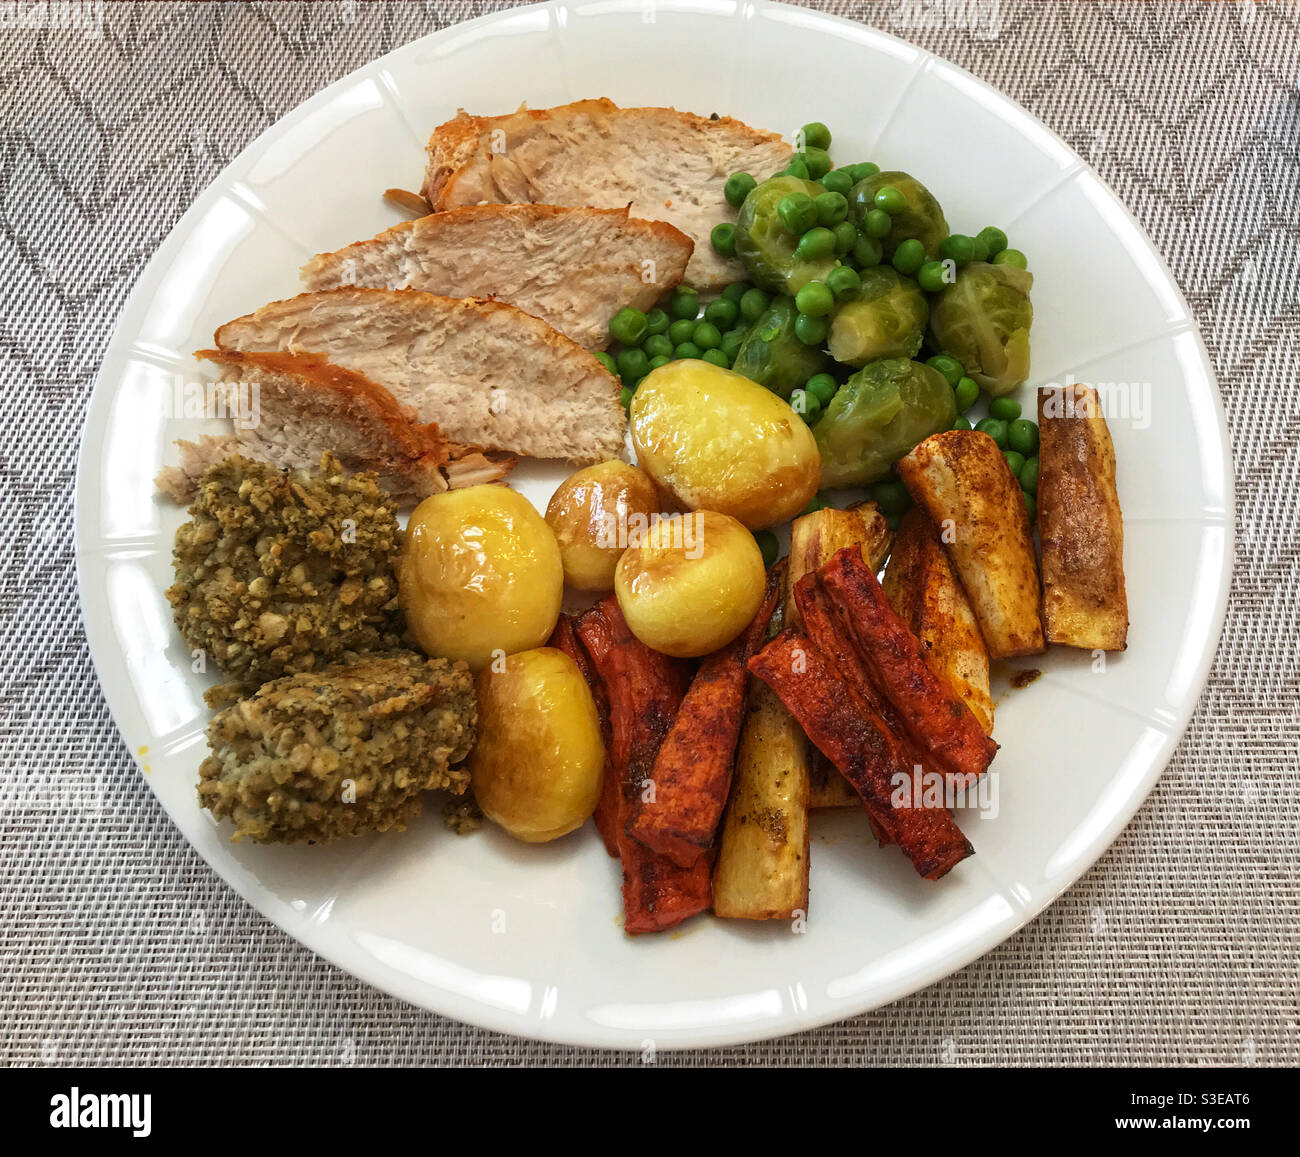 Roast turkey dinner with stuffing, potatoes, parsnips, carrots, sprouts and peas. Stock Photo